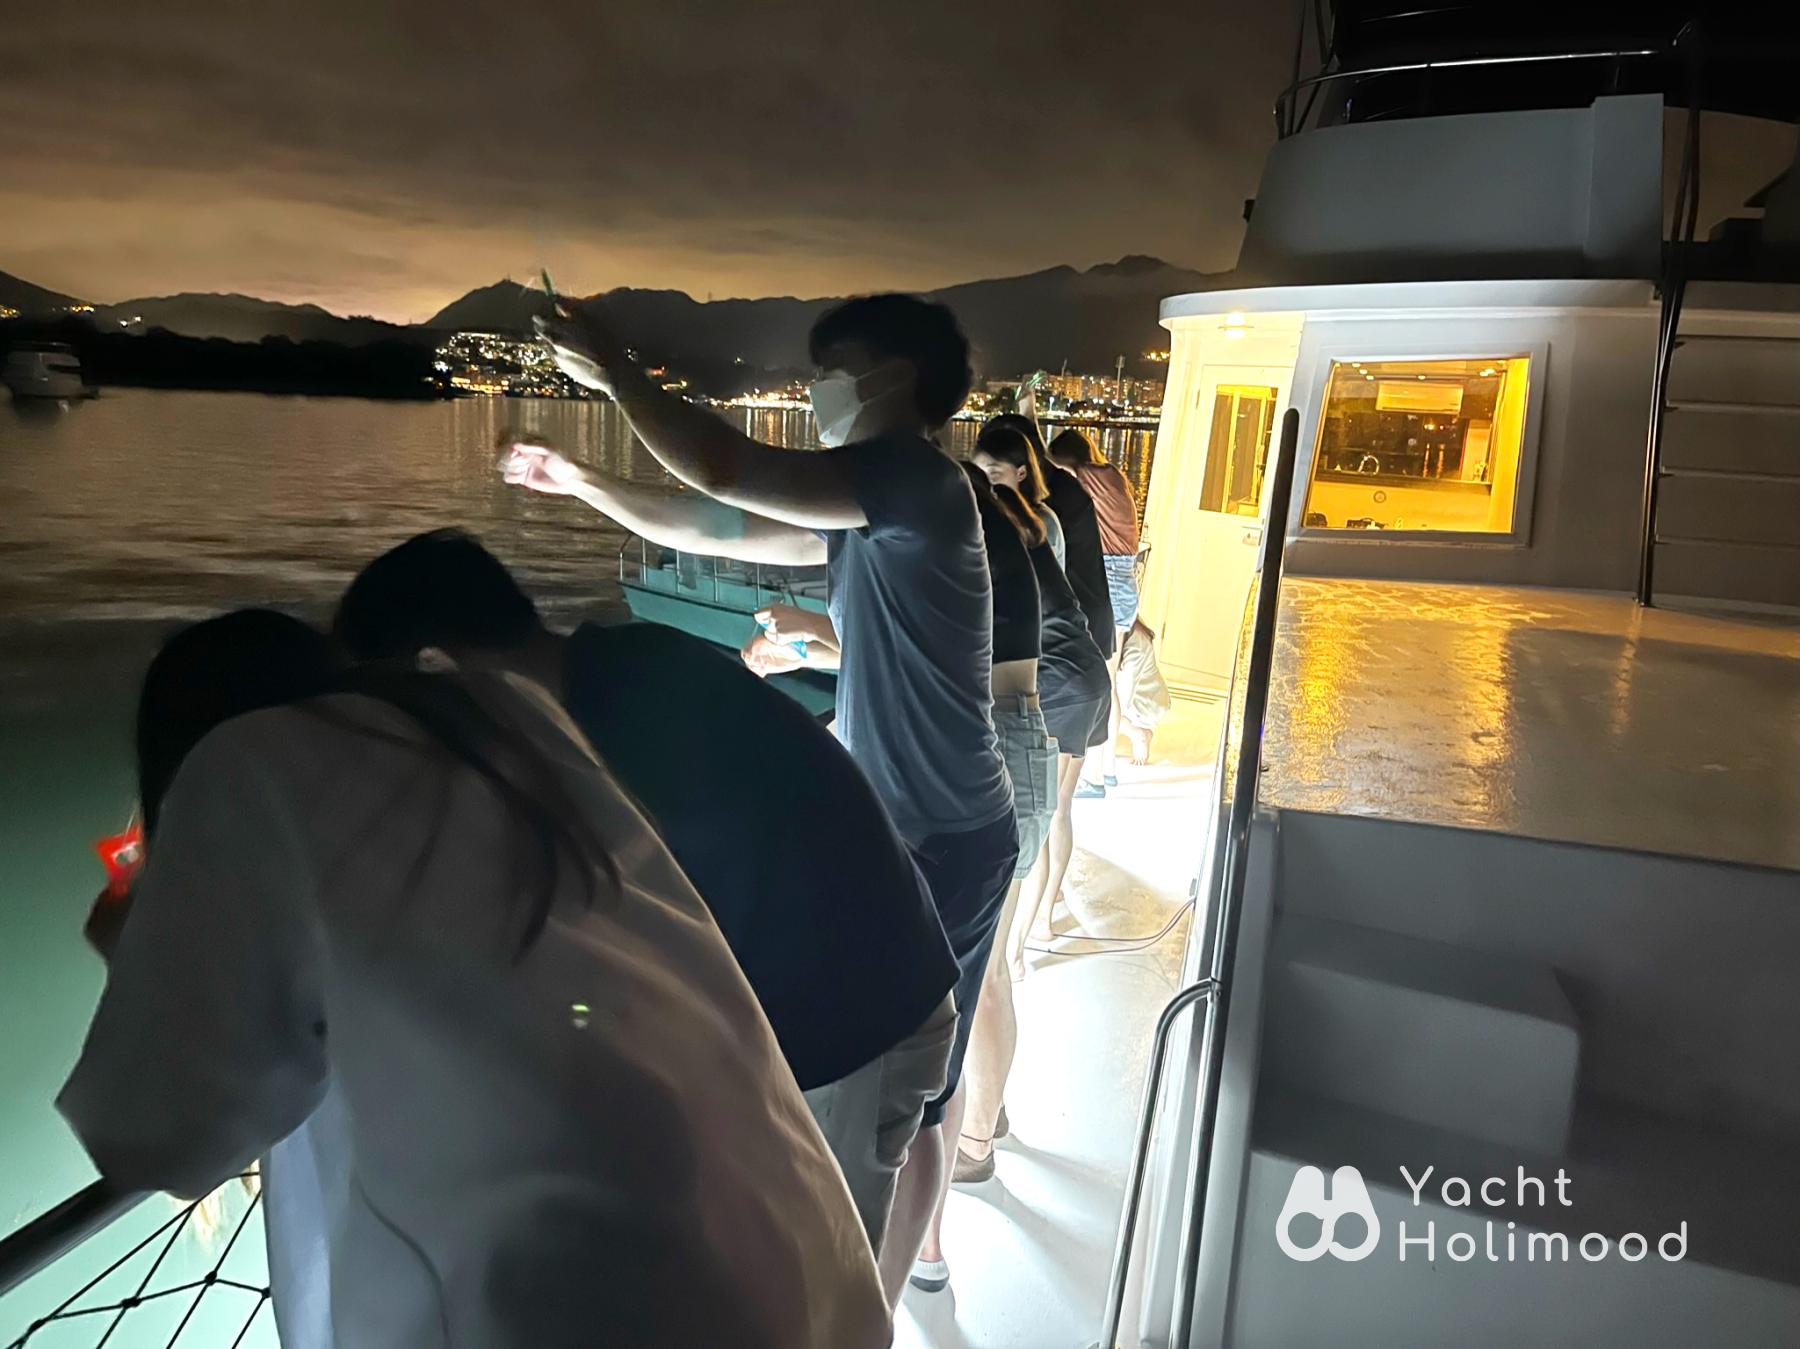 JW01 *The first choice for parents and children (equipped with life jackets and game equipment for children aged 3~12) feature Sai Kung Spacious House Boat （Swimming Pool & Wakesurfing options ava.) 24